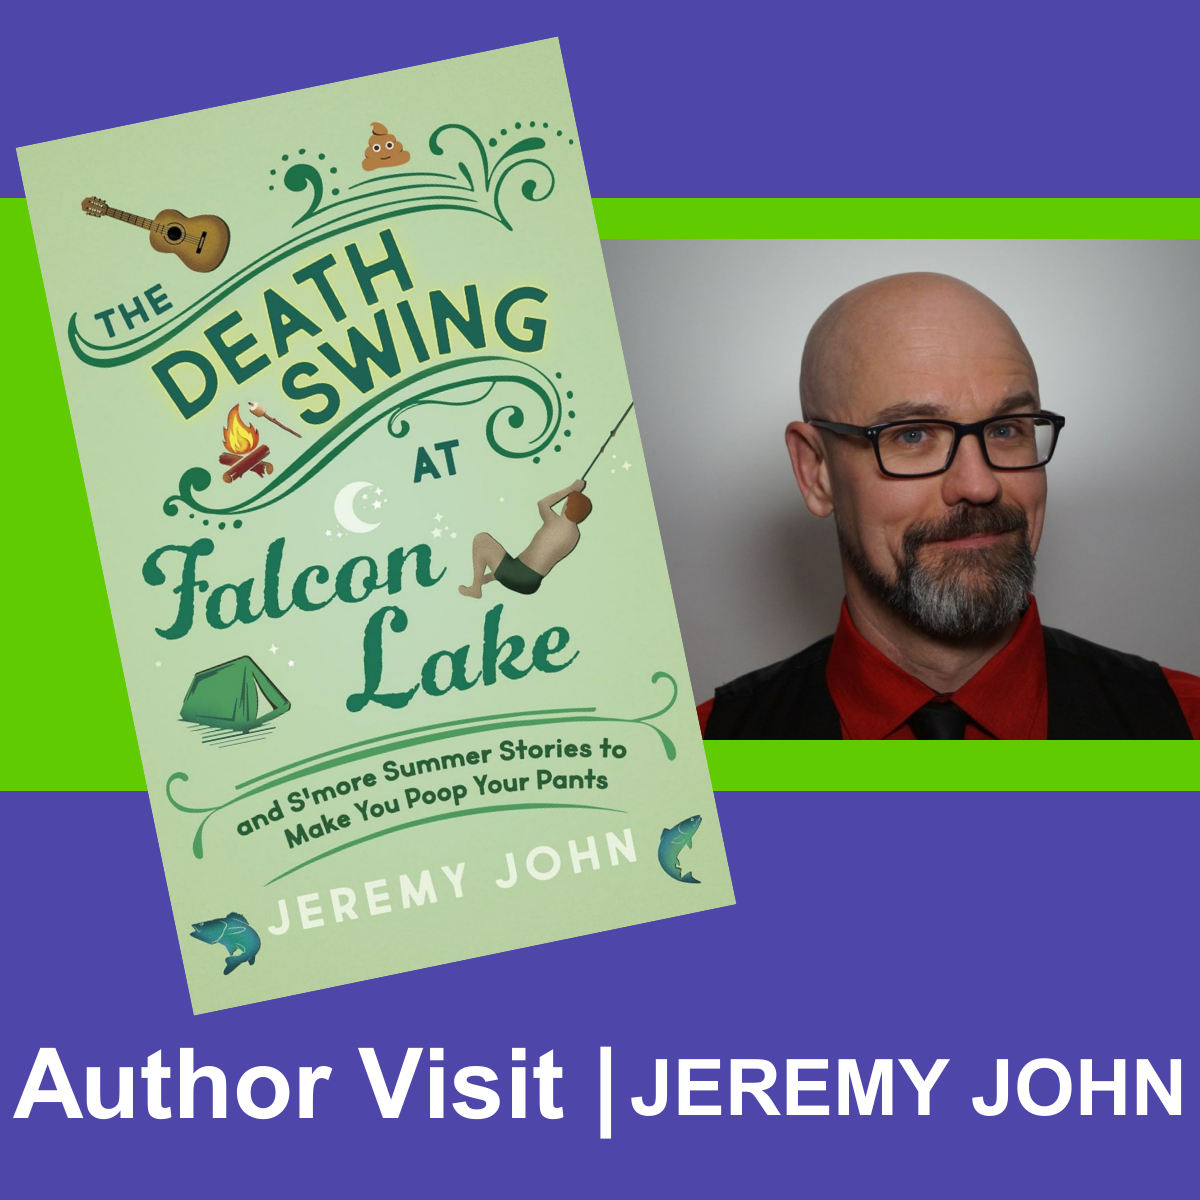 Book cover of The Death Swing at Falcon Lake and photo of Jeremy John. Text reads: Author visit: Jeremy John.